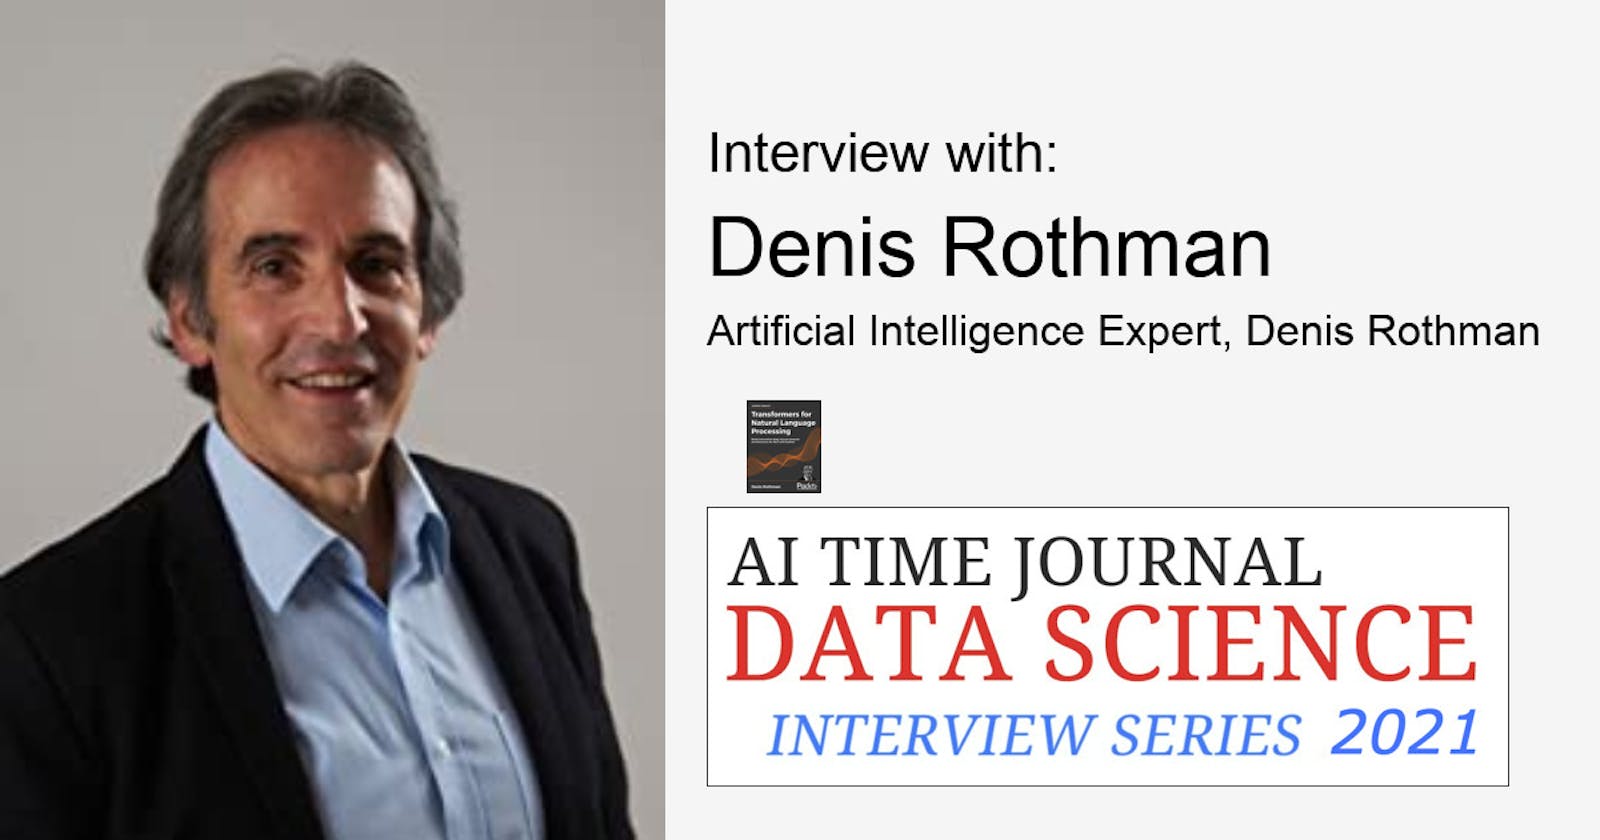 How AI Has Changed Over the Years: Advances, Challenges & More - Hear from Denis Rothman, AI Expert